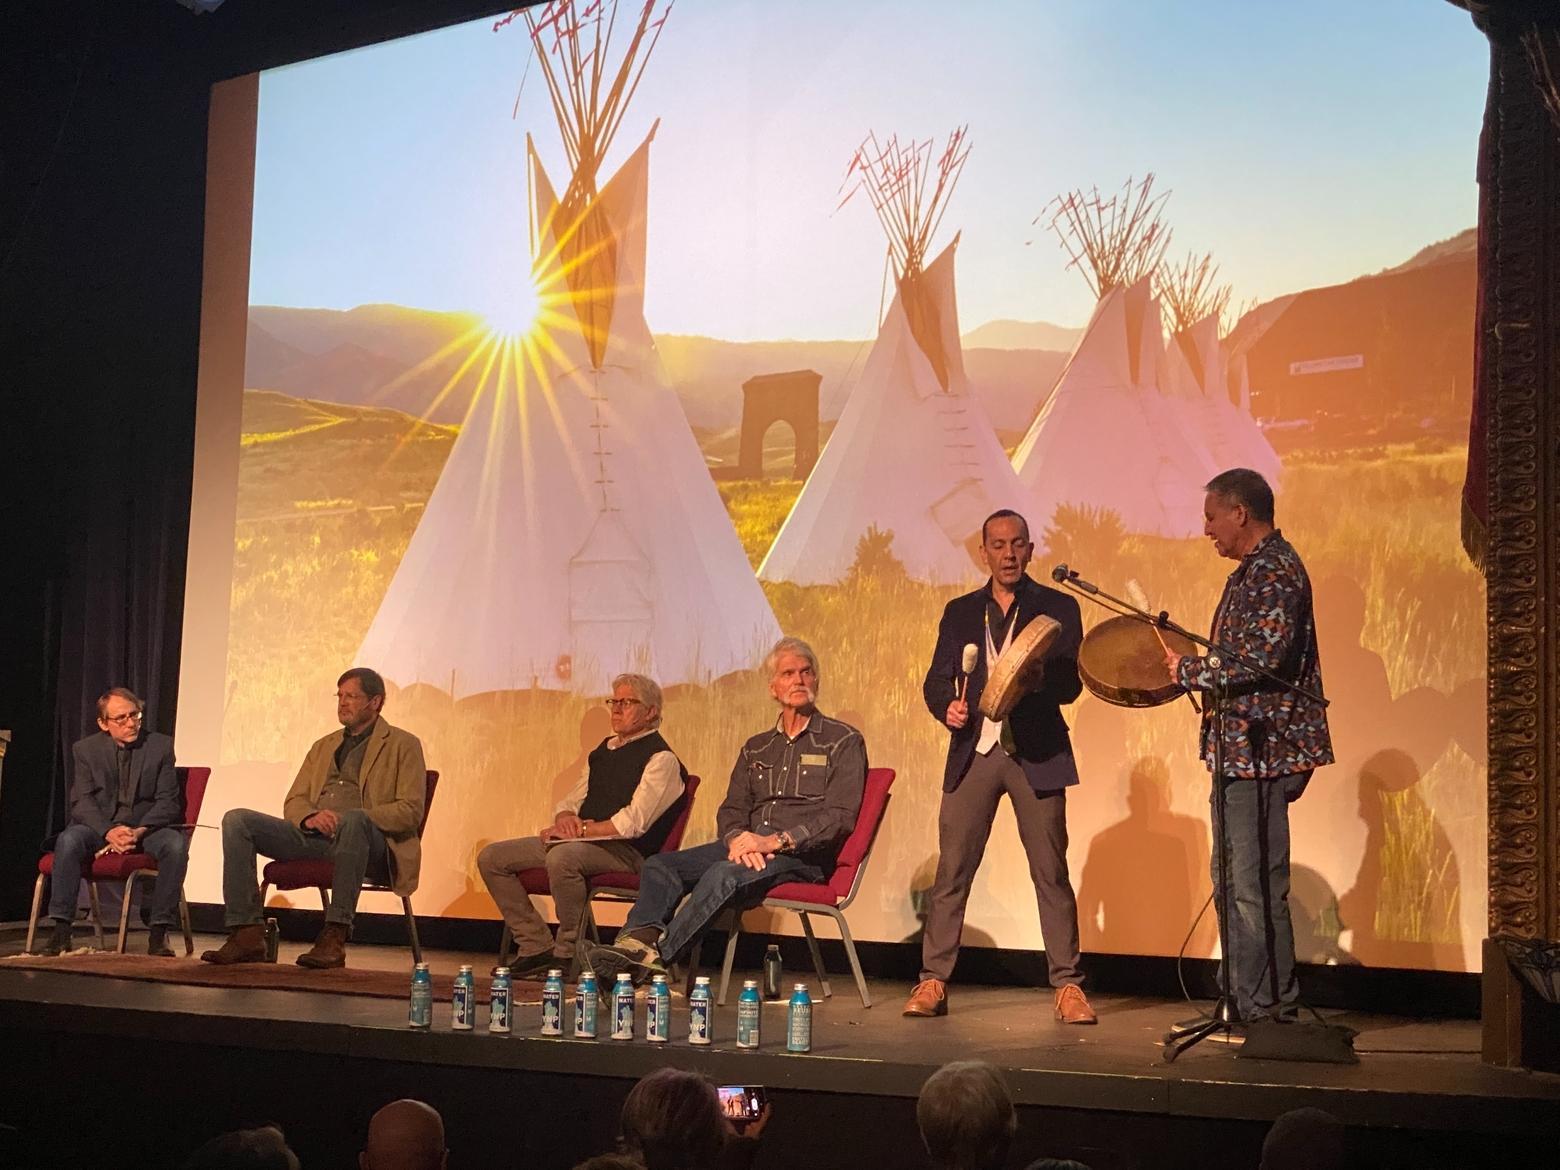 Conrad Fisher of Northern Cheyenne/Tsėhéstáno and his nephew, MoJo board member Shane Doyle, regaled panelists and the crowd at the Jan. 10 event at The Ellen Theatre in Bozeman. Photo by Joseph T. O'Connor